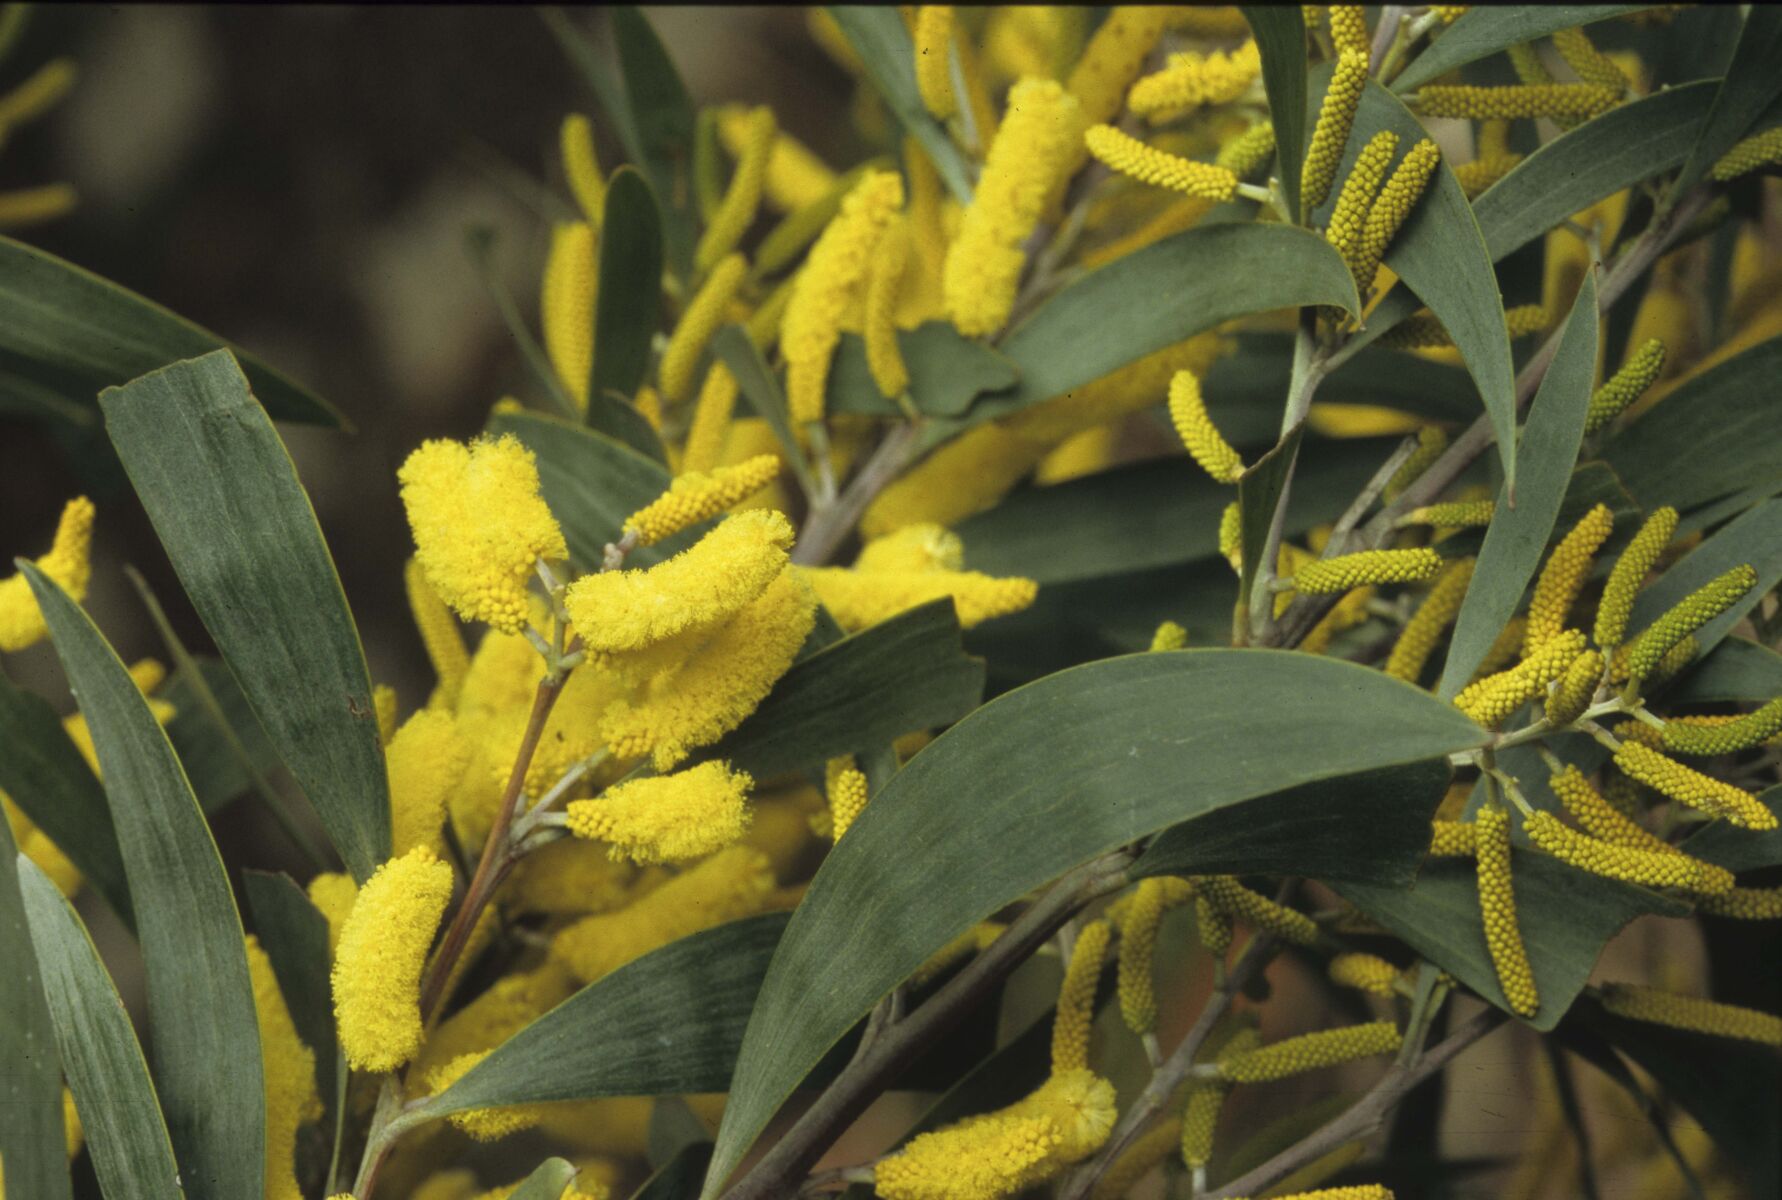 Showing yellow flowers